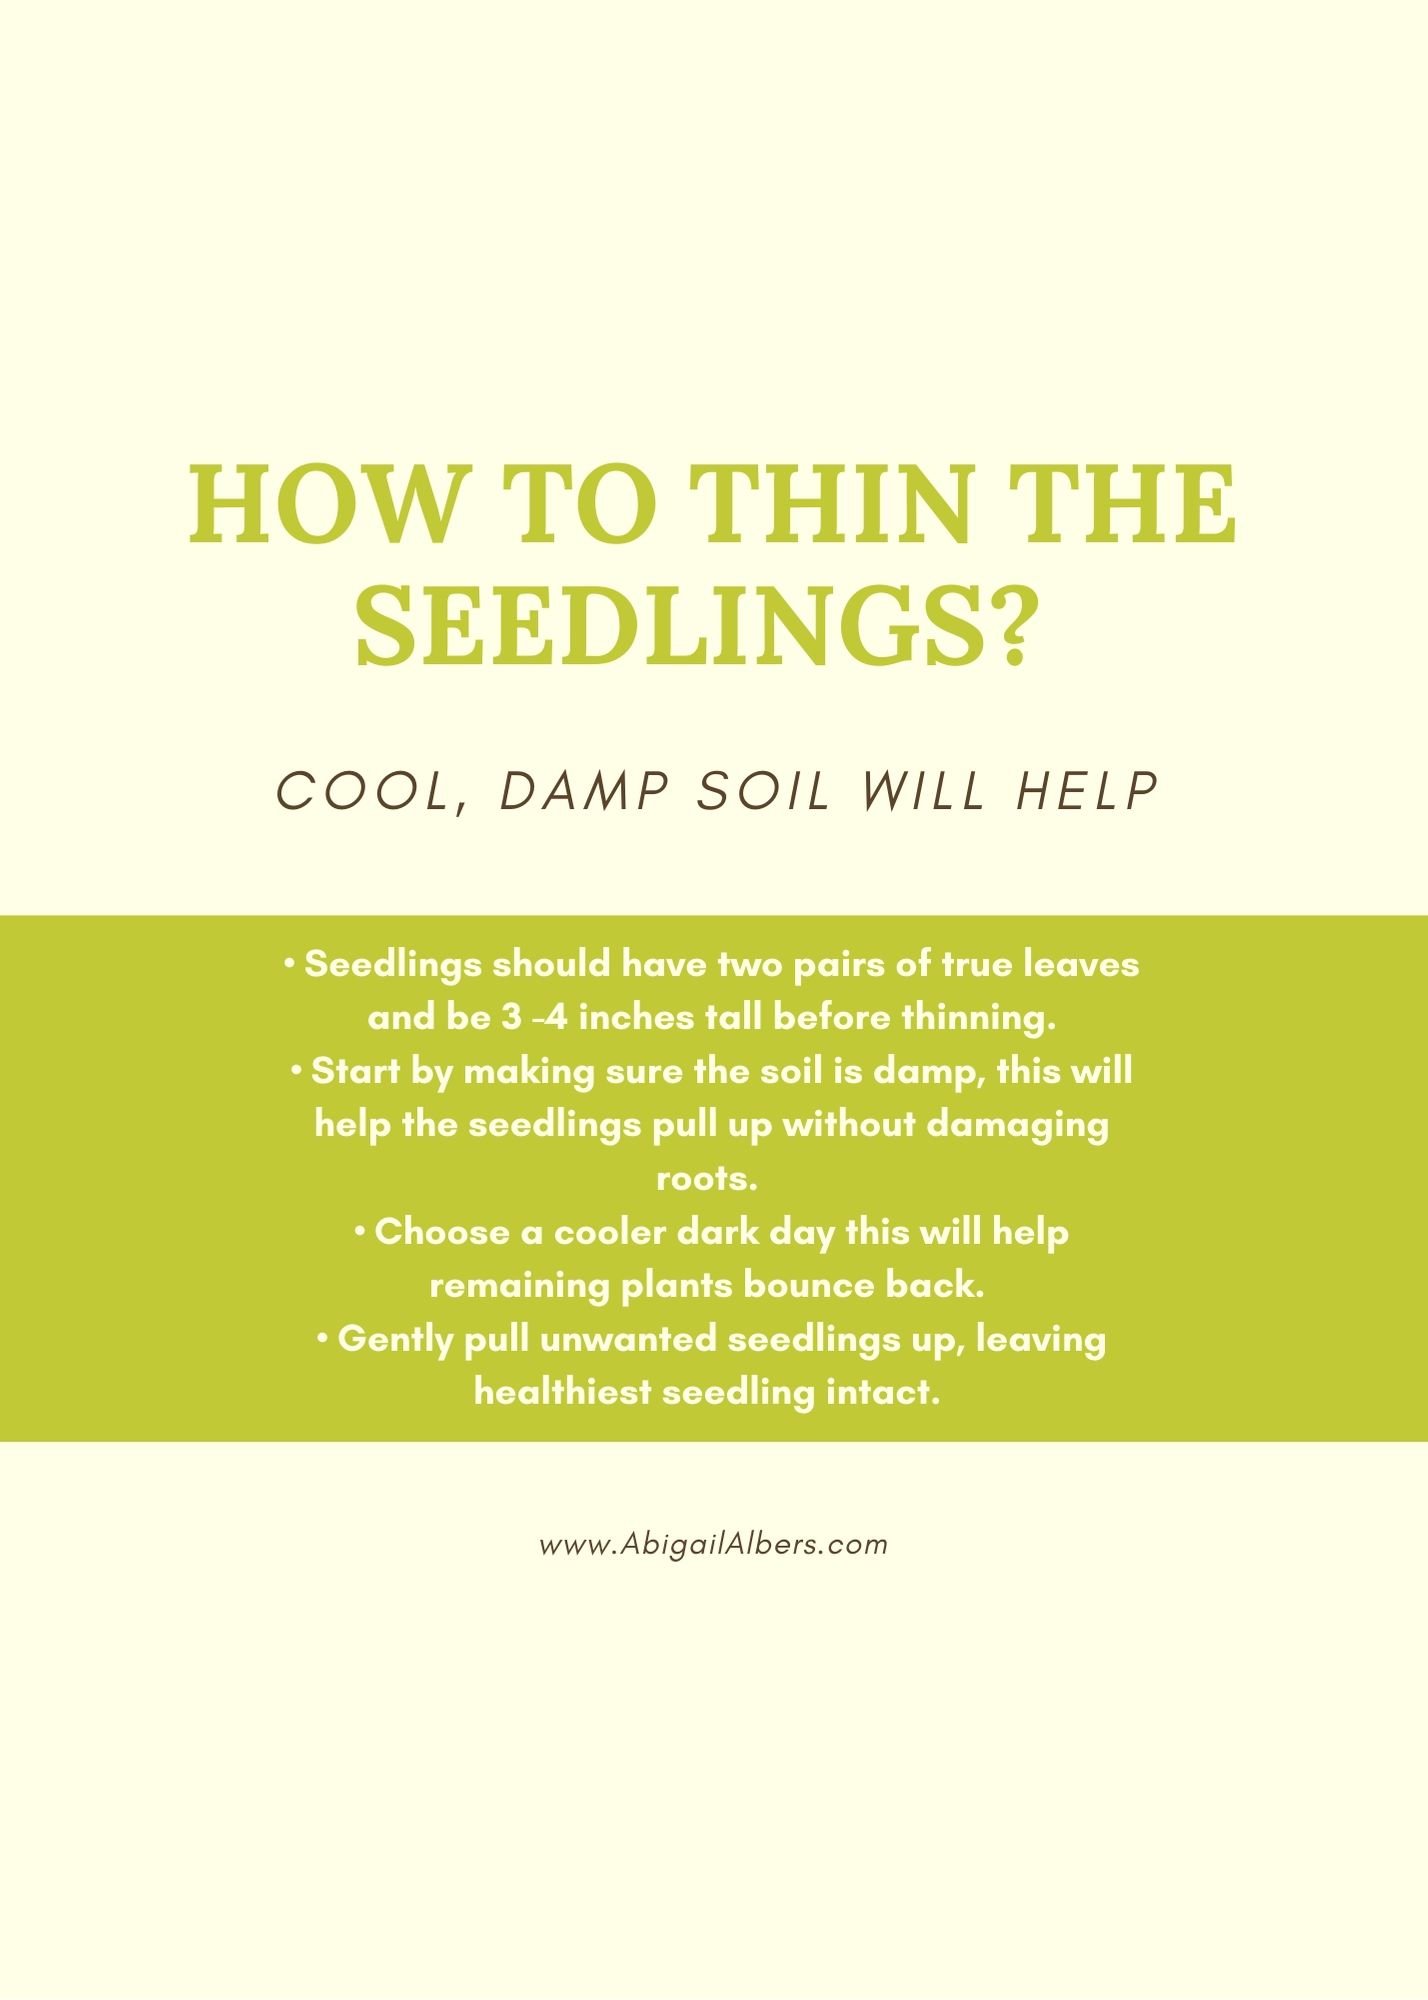 Why do I need to thin my seedlings